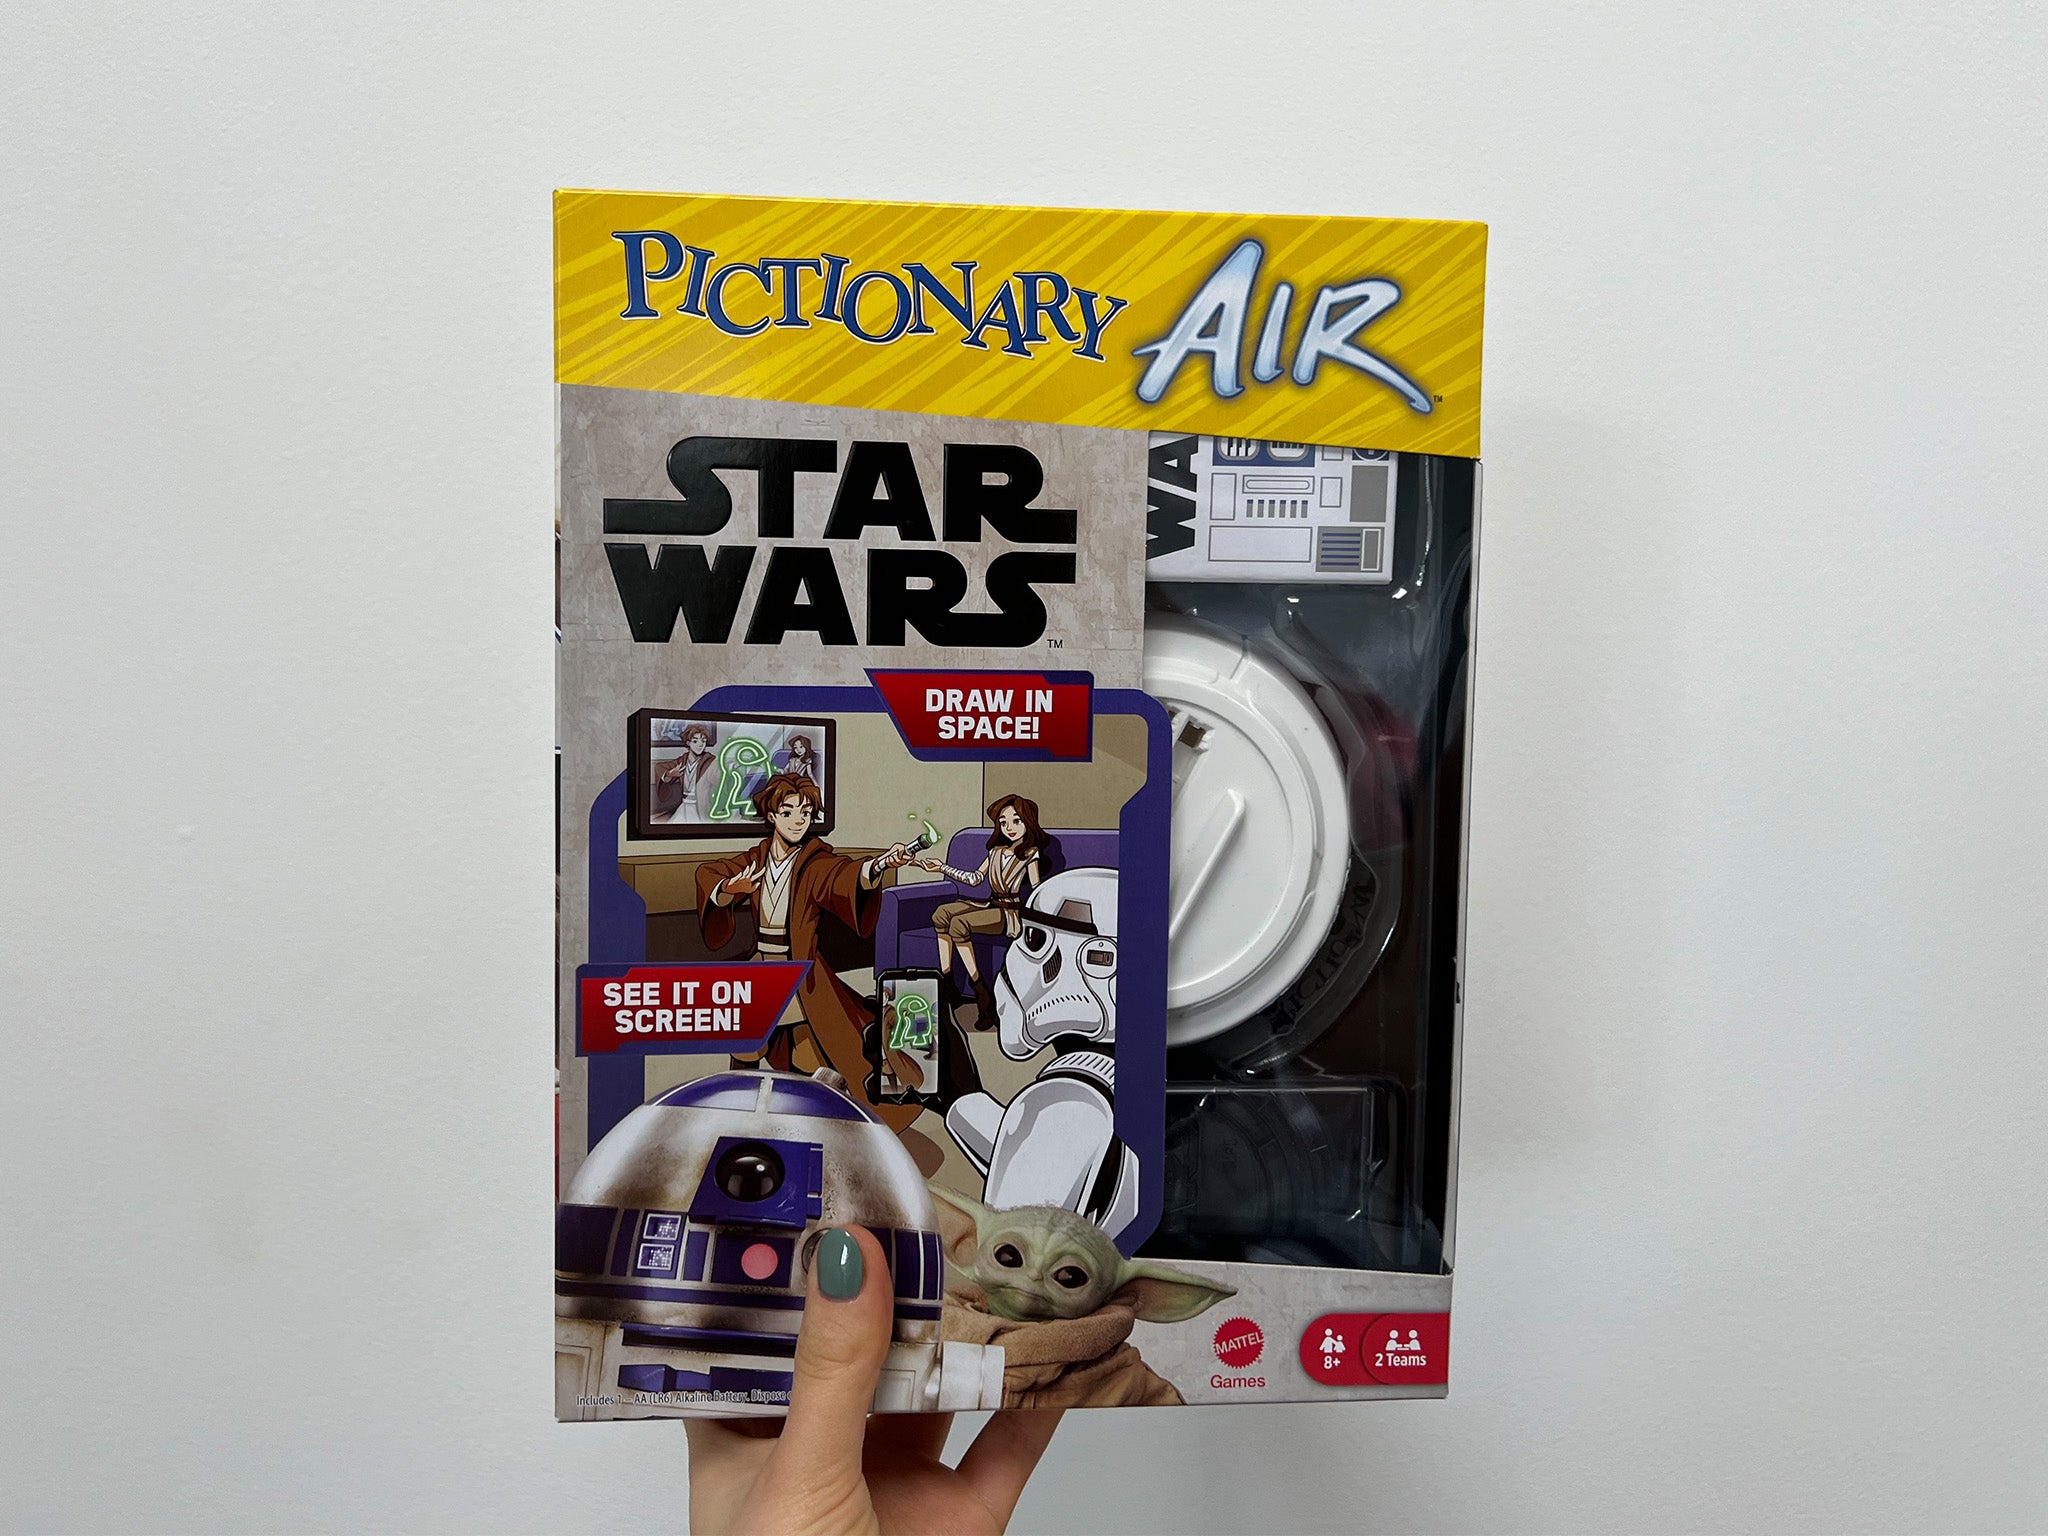 Pictionary air Star Wars family drawing game